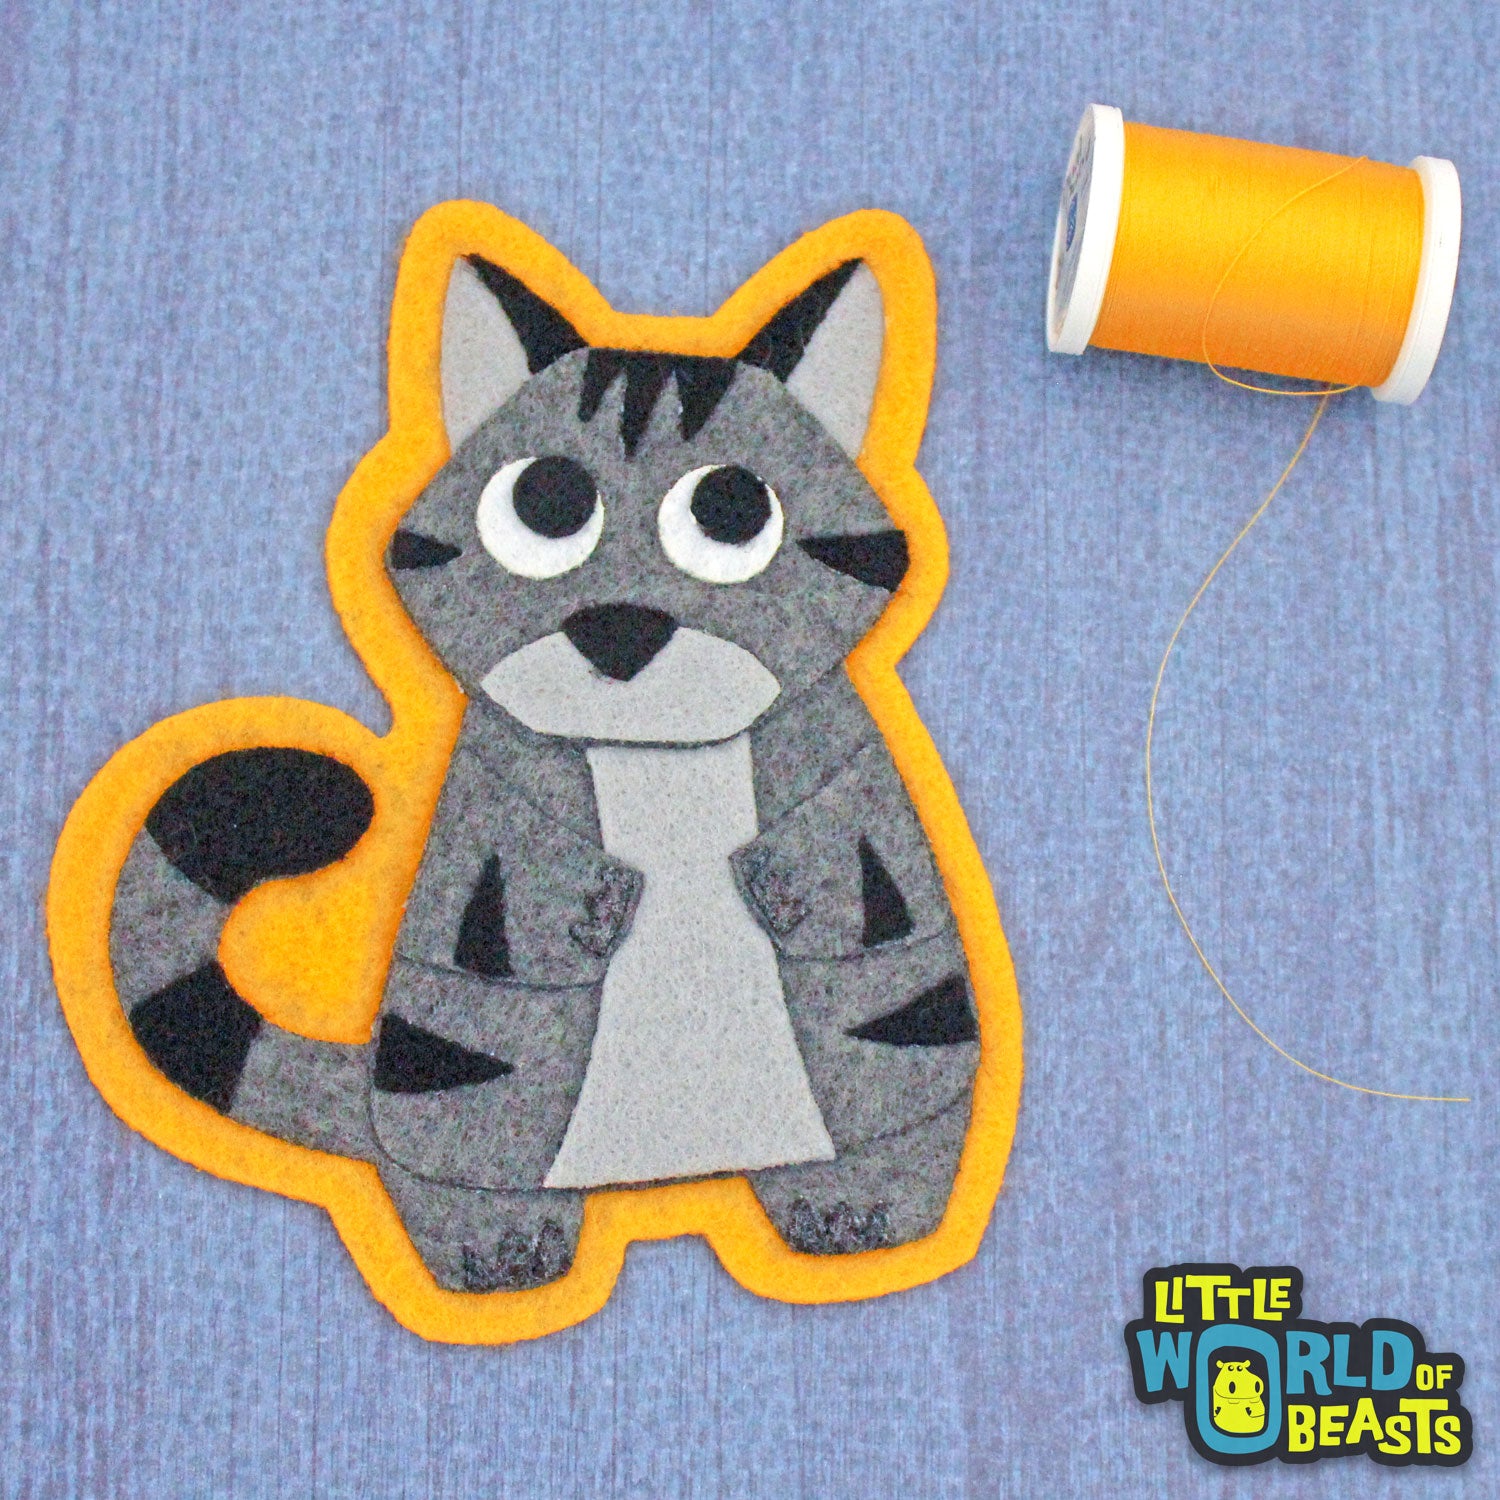 Hazel the Gray Tabby - Felt Cat Patch - Sew on or Iron on - Little World of Beasts